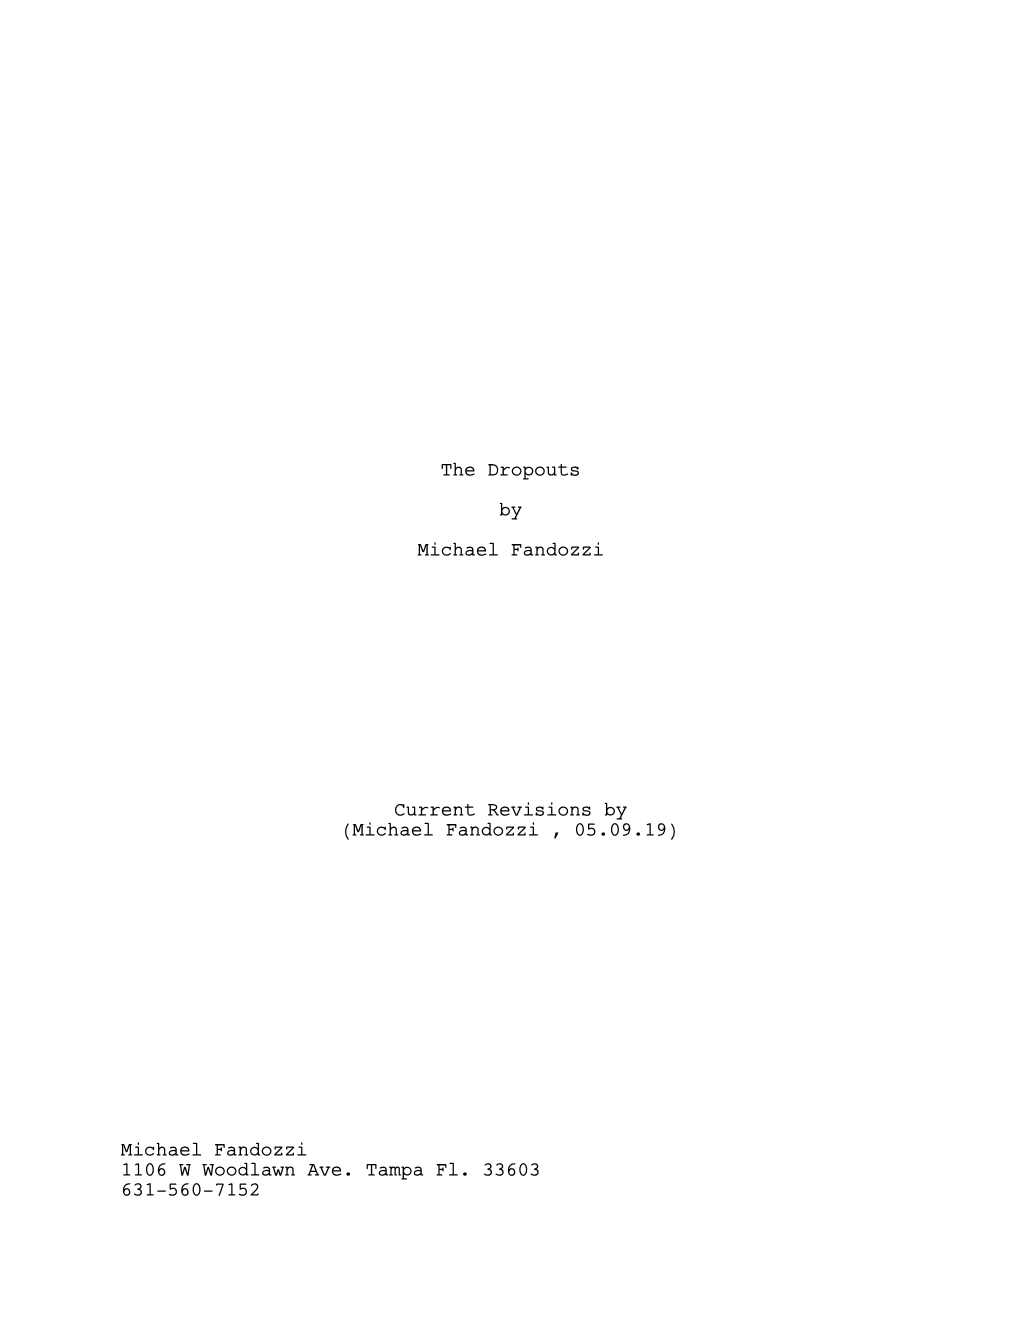 "The Dropouts" Screenplay